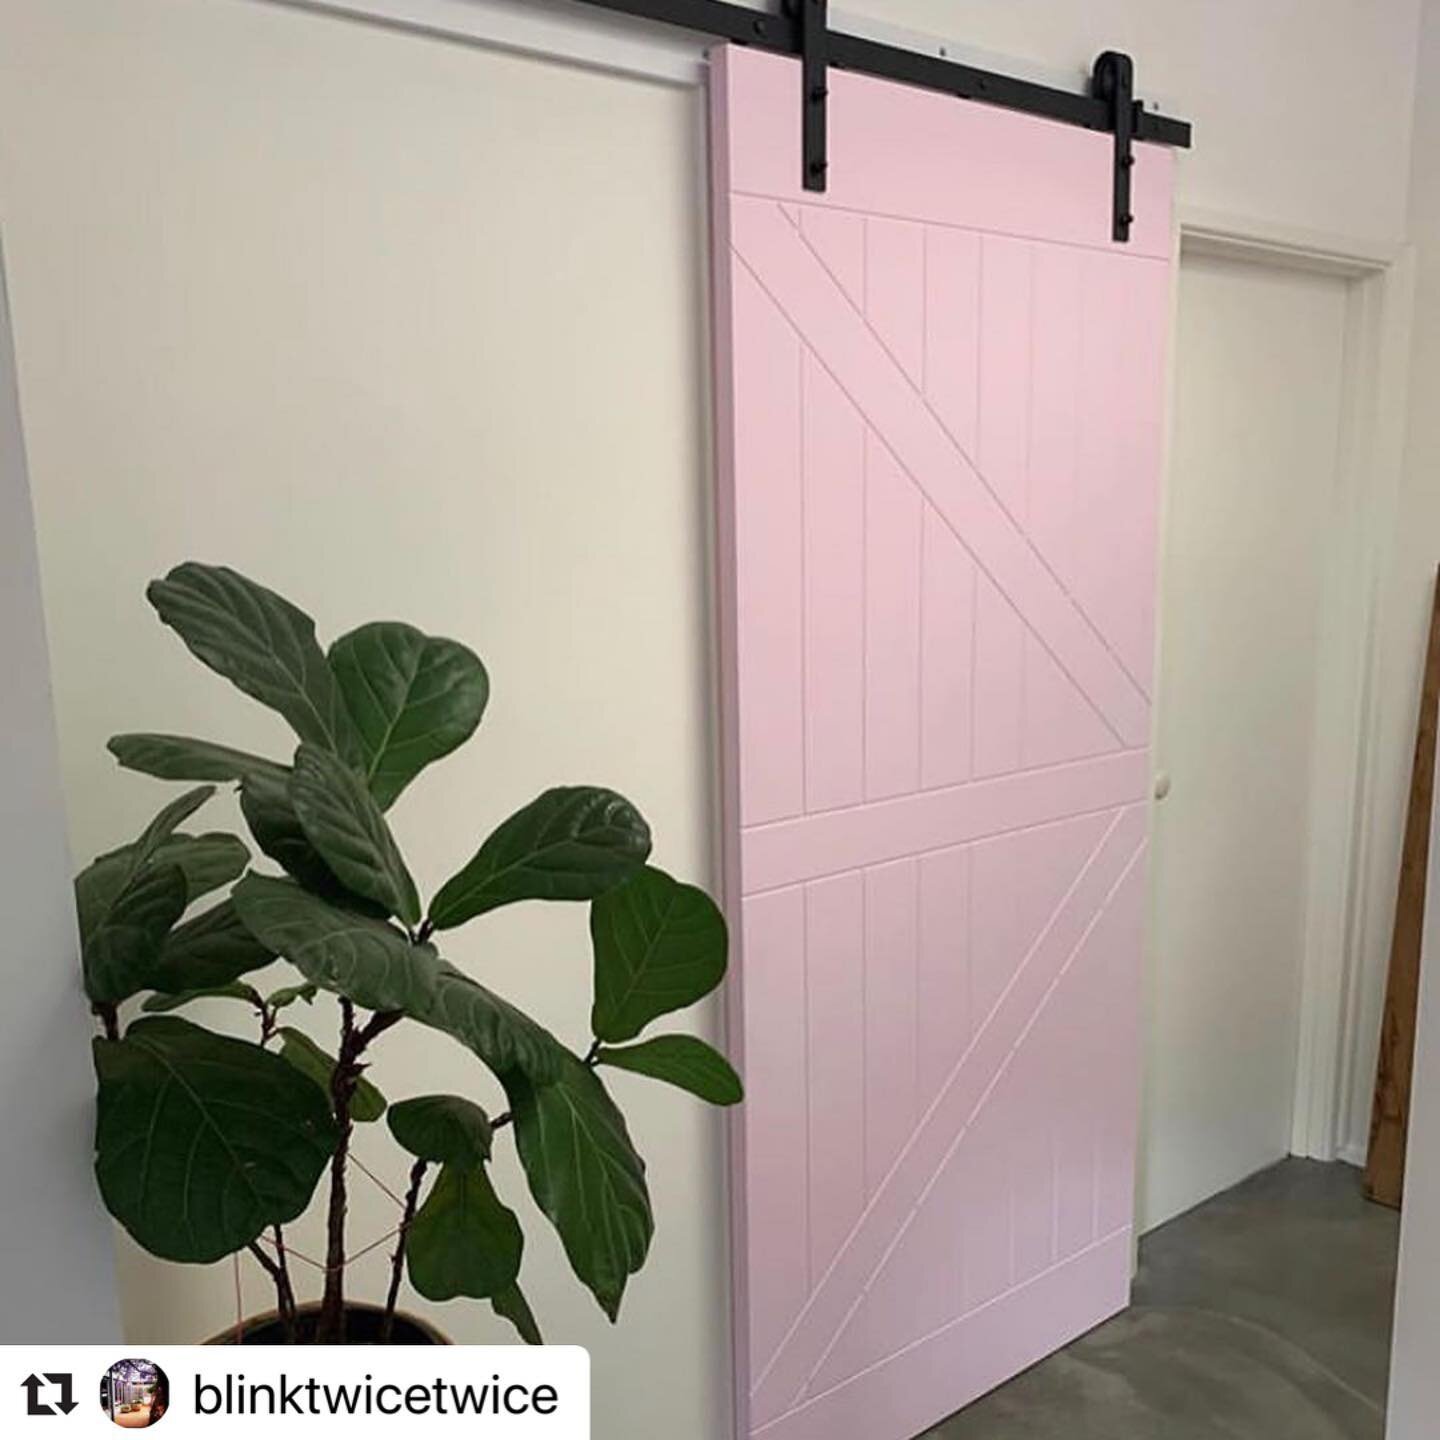 These legends were a pleasure to work with! 
Be sure to give them a follow 👍🏼

#Repost @blinktwicetwice with @make_repost
・・・
Thanks to our handy man Dan for hanging our new tan room door today (on his day off..) also big shout out to Scotty for th